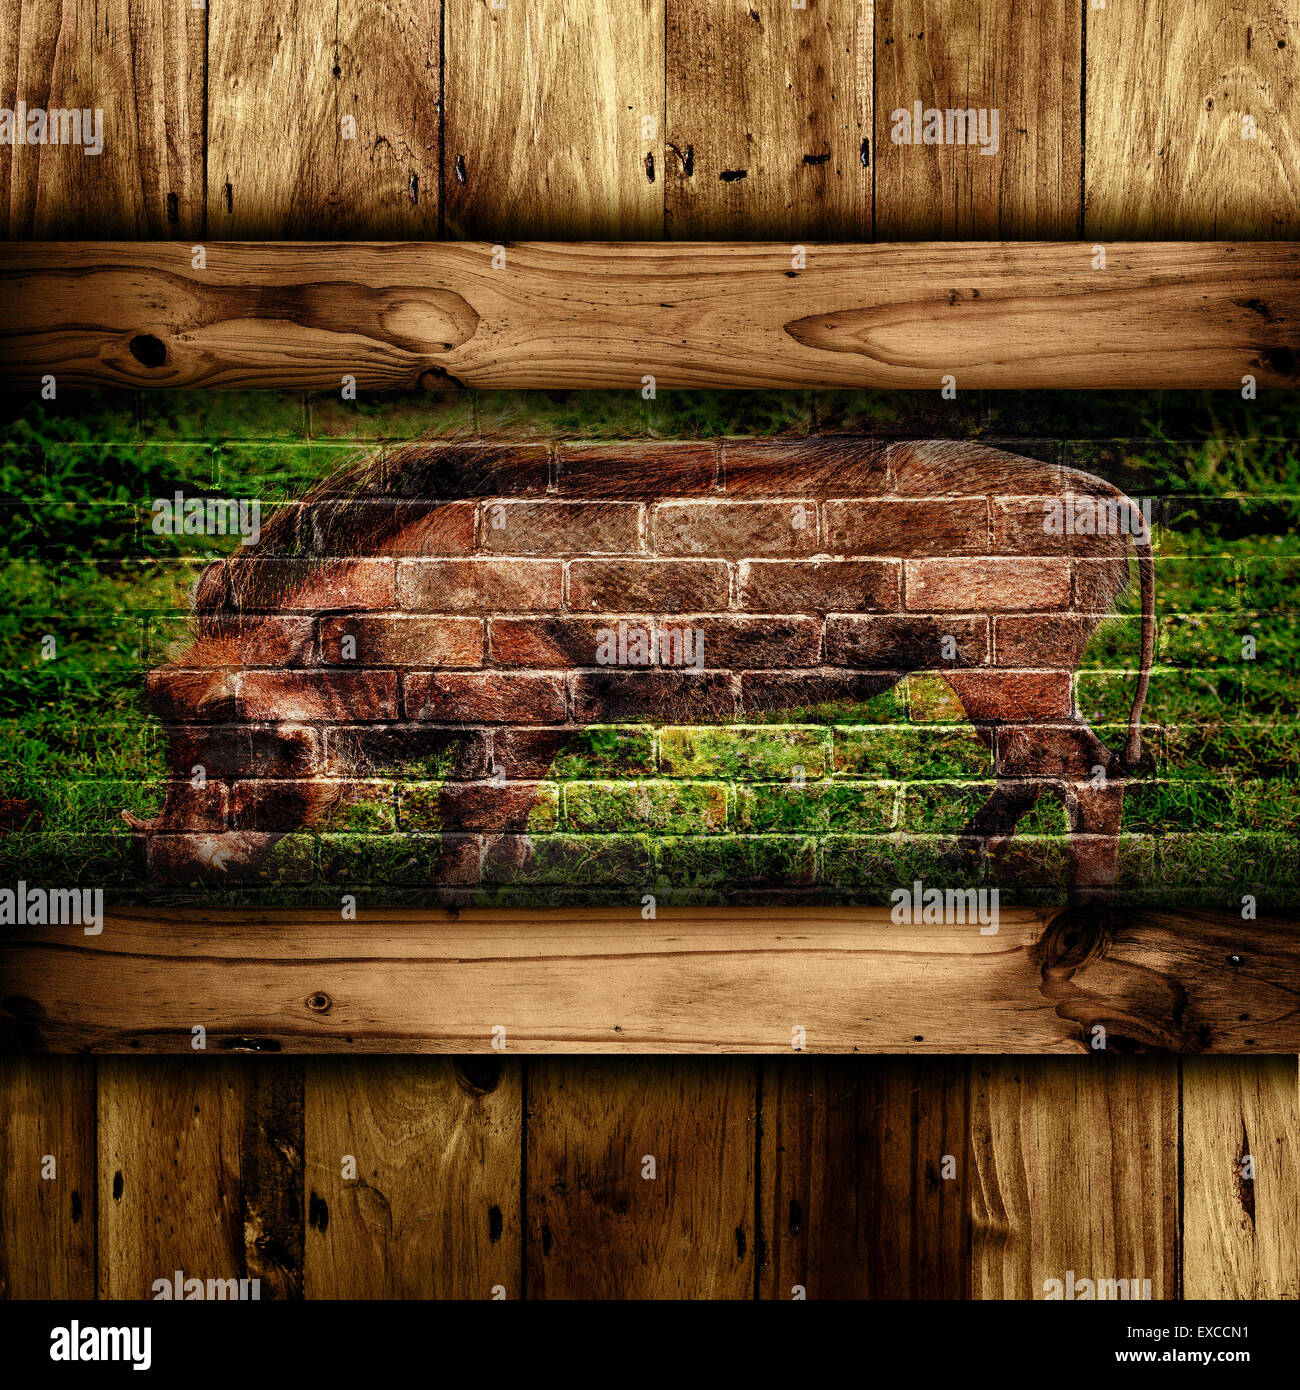 Abstract wooden and brick wall with a warthog on the brick. Stock Photo